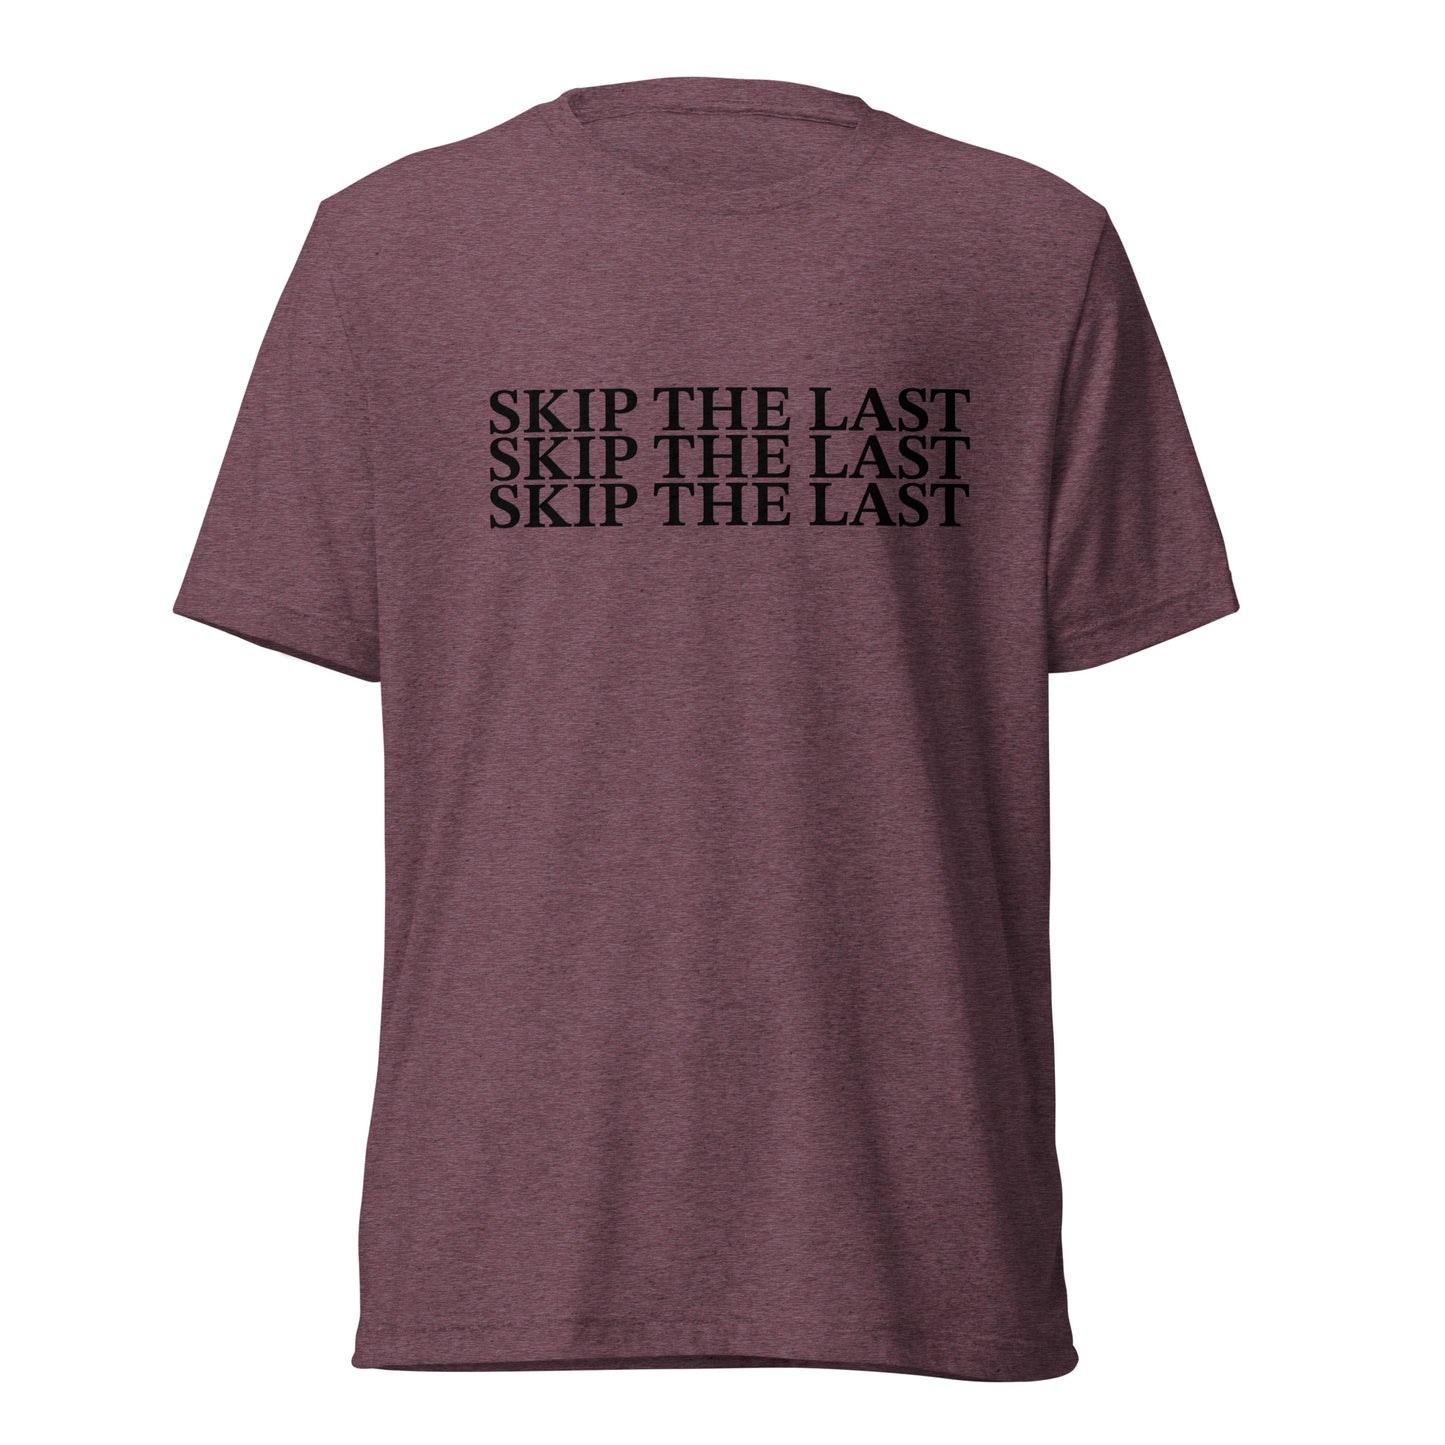 Two More Skip The Last "Skip the Last x3" maroon unisex tri-blend t-shirt. Front view